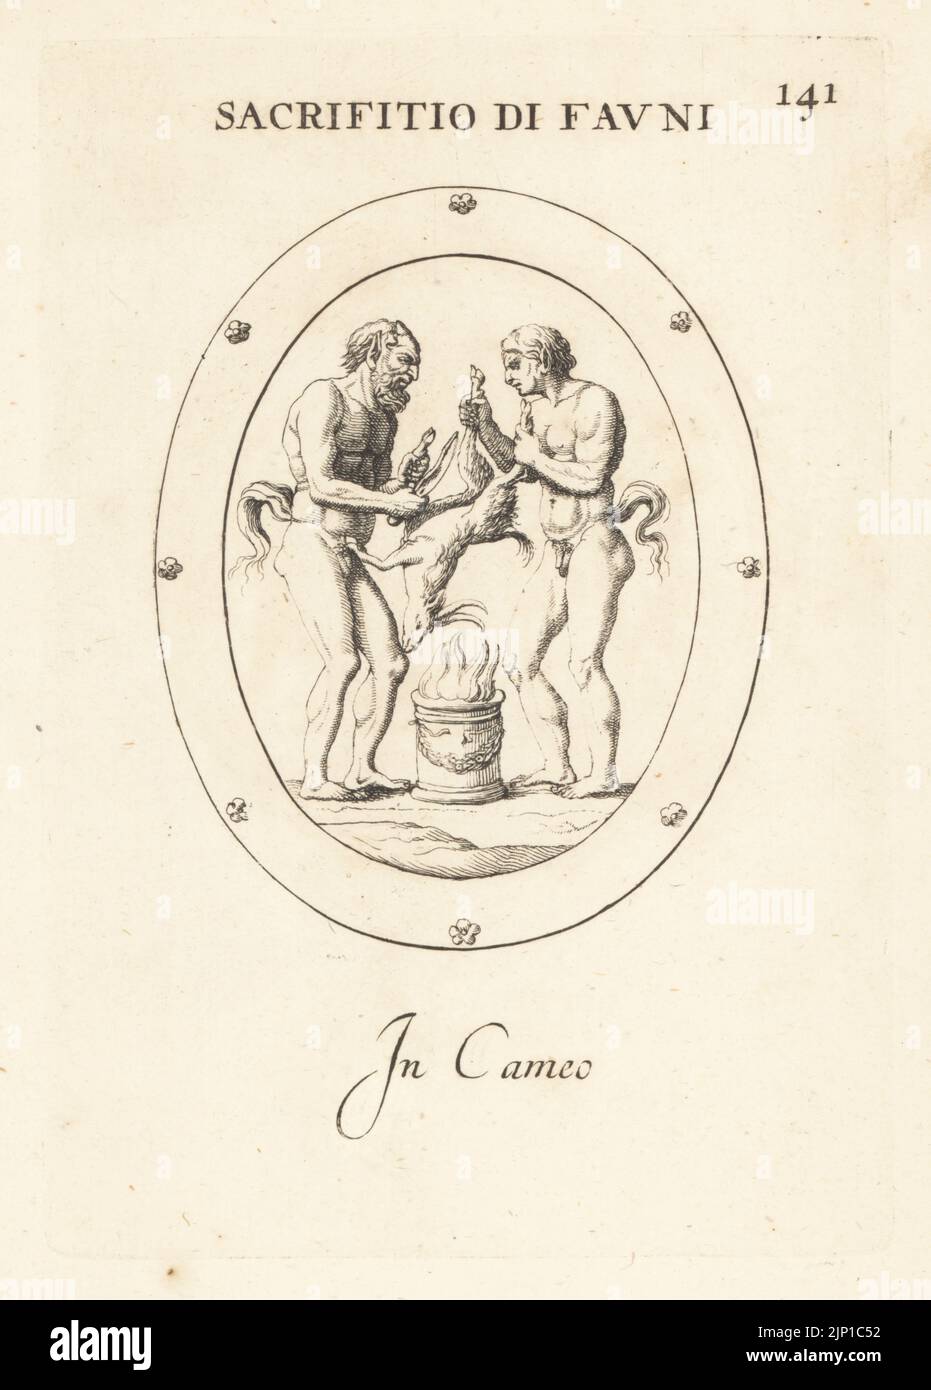 Two fauni, with tails and pointed ears, sacrificing a goat at an altar. Faunus, Roman gods of the forest, making an offering to Bacchus or Dionysus Aegobolus in Boeotia. Sacrifitio di Fauni. In cameo. Copperplate engraving by Giovanni Battista Galestruzzi after Leonardo Agostini from Gemmae et Sculpturae Antiquae Depicti ab Leonardo Augustino Senesi, Abraham Blooteling, Amsterdam, 1685. Stock Photo